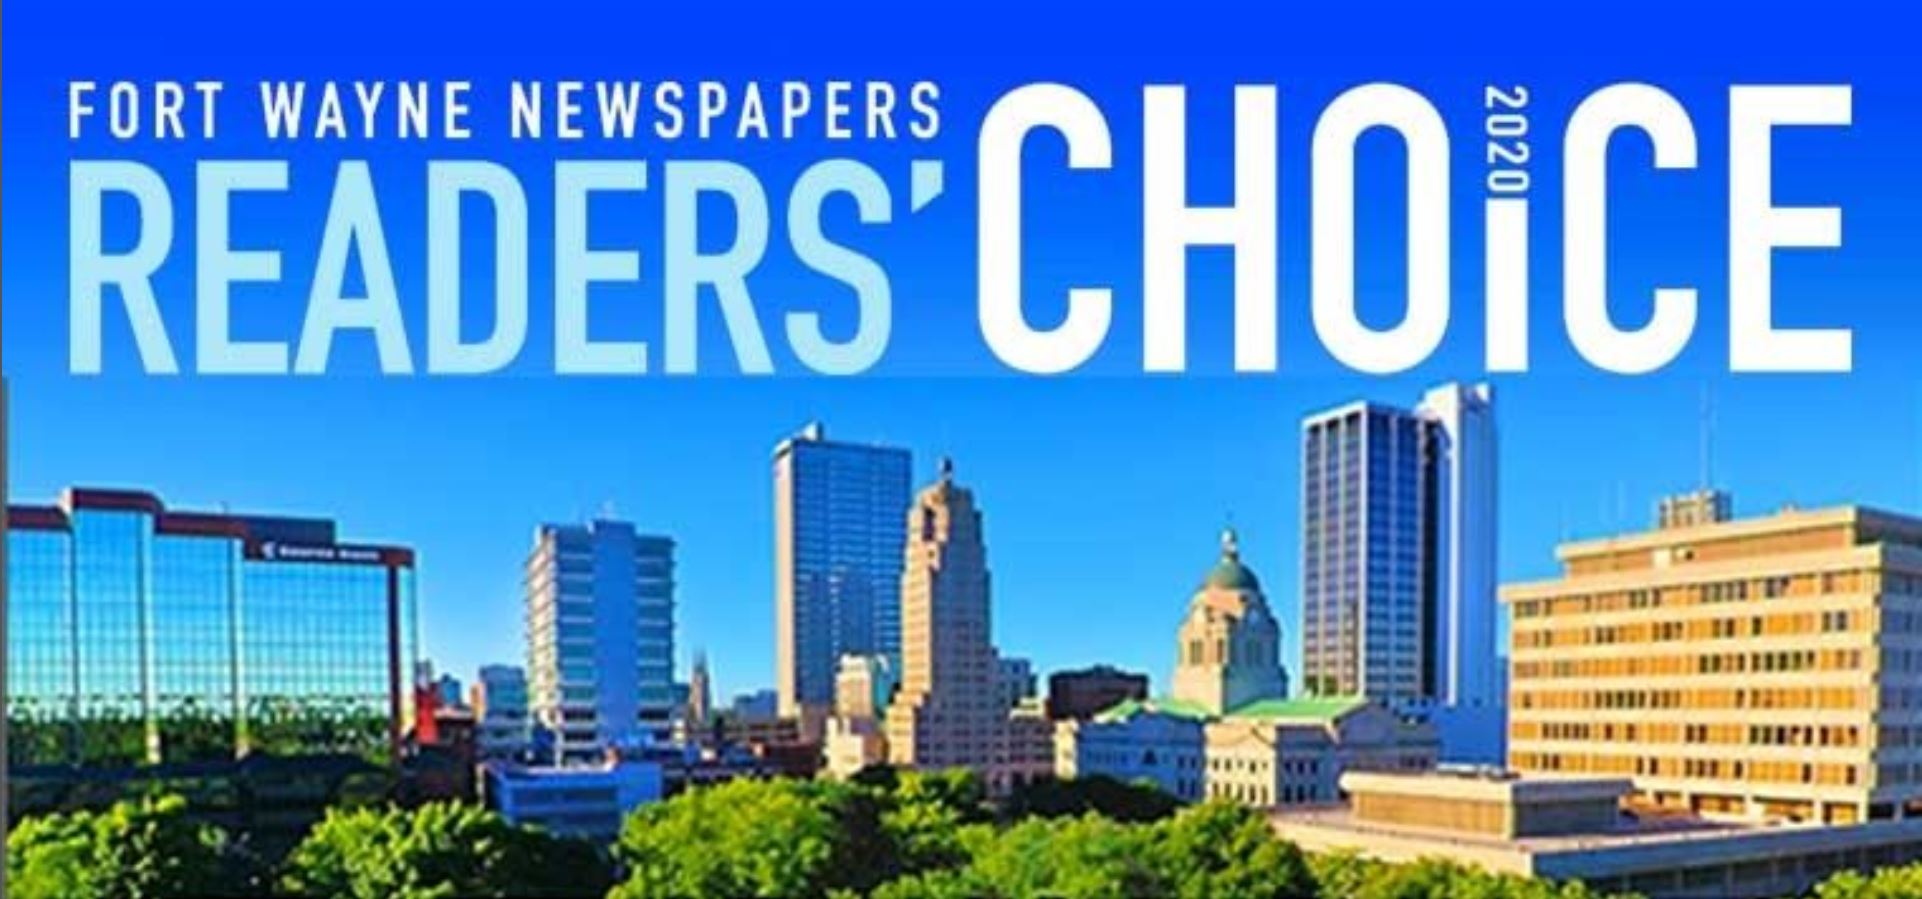 Fort Wayne Newspapers Readers' Choice Awards 2020 The DeHayes Group